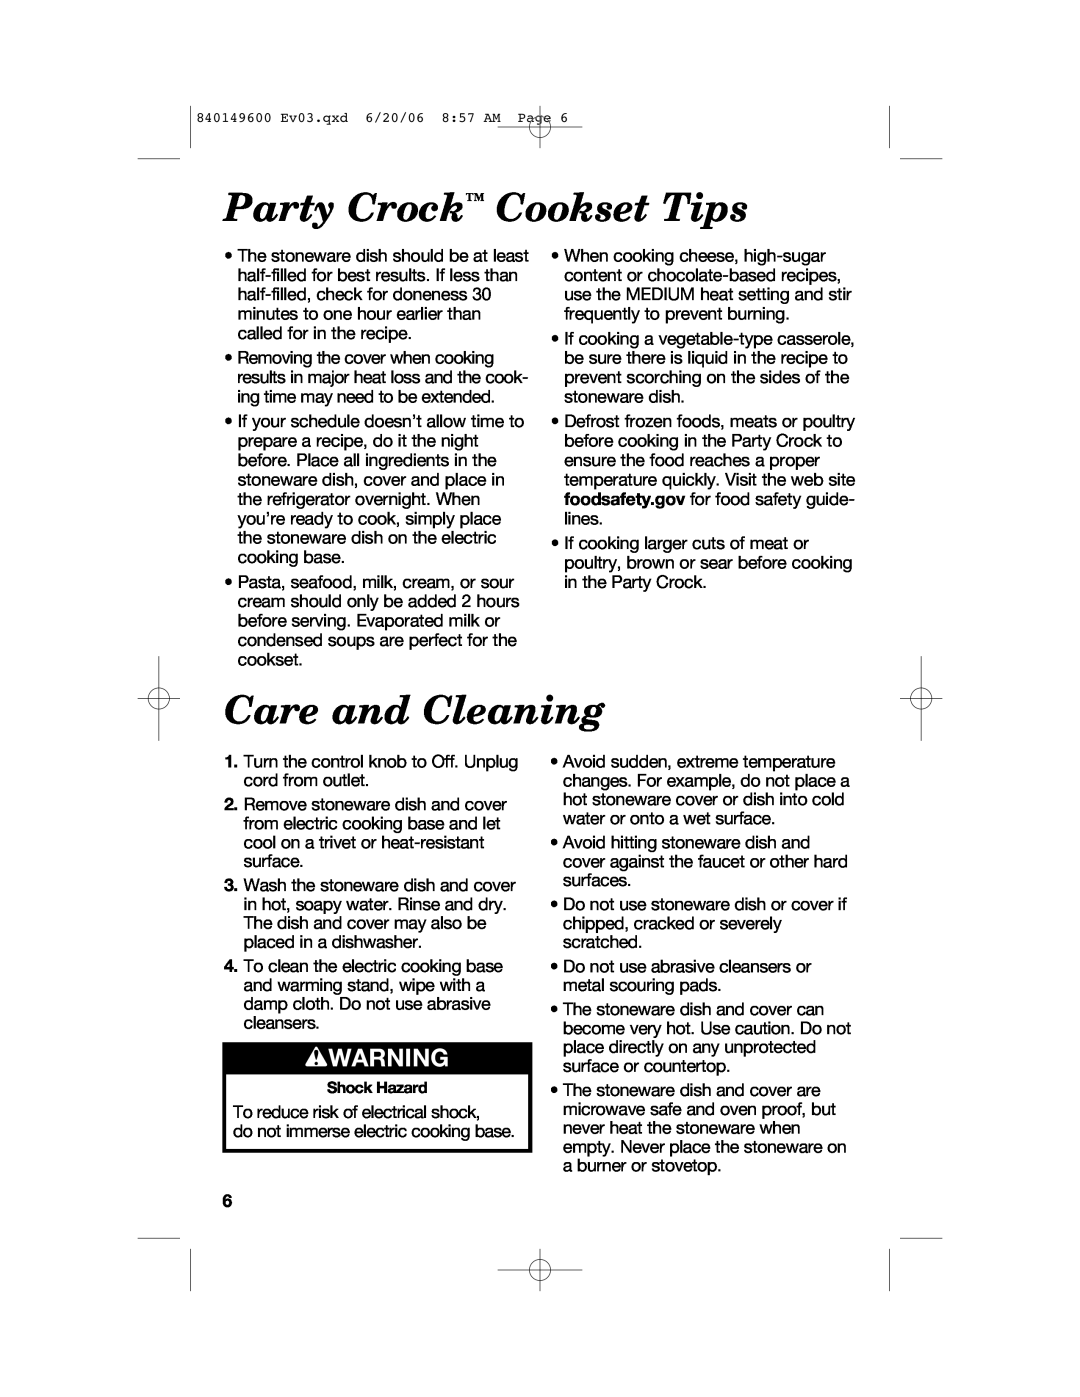 Hamilton Beach 840149600 manual Party Crock Cookset Tips, Care and Cleaning, wWARNING 